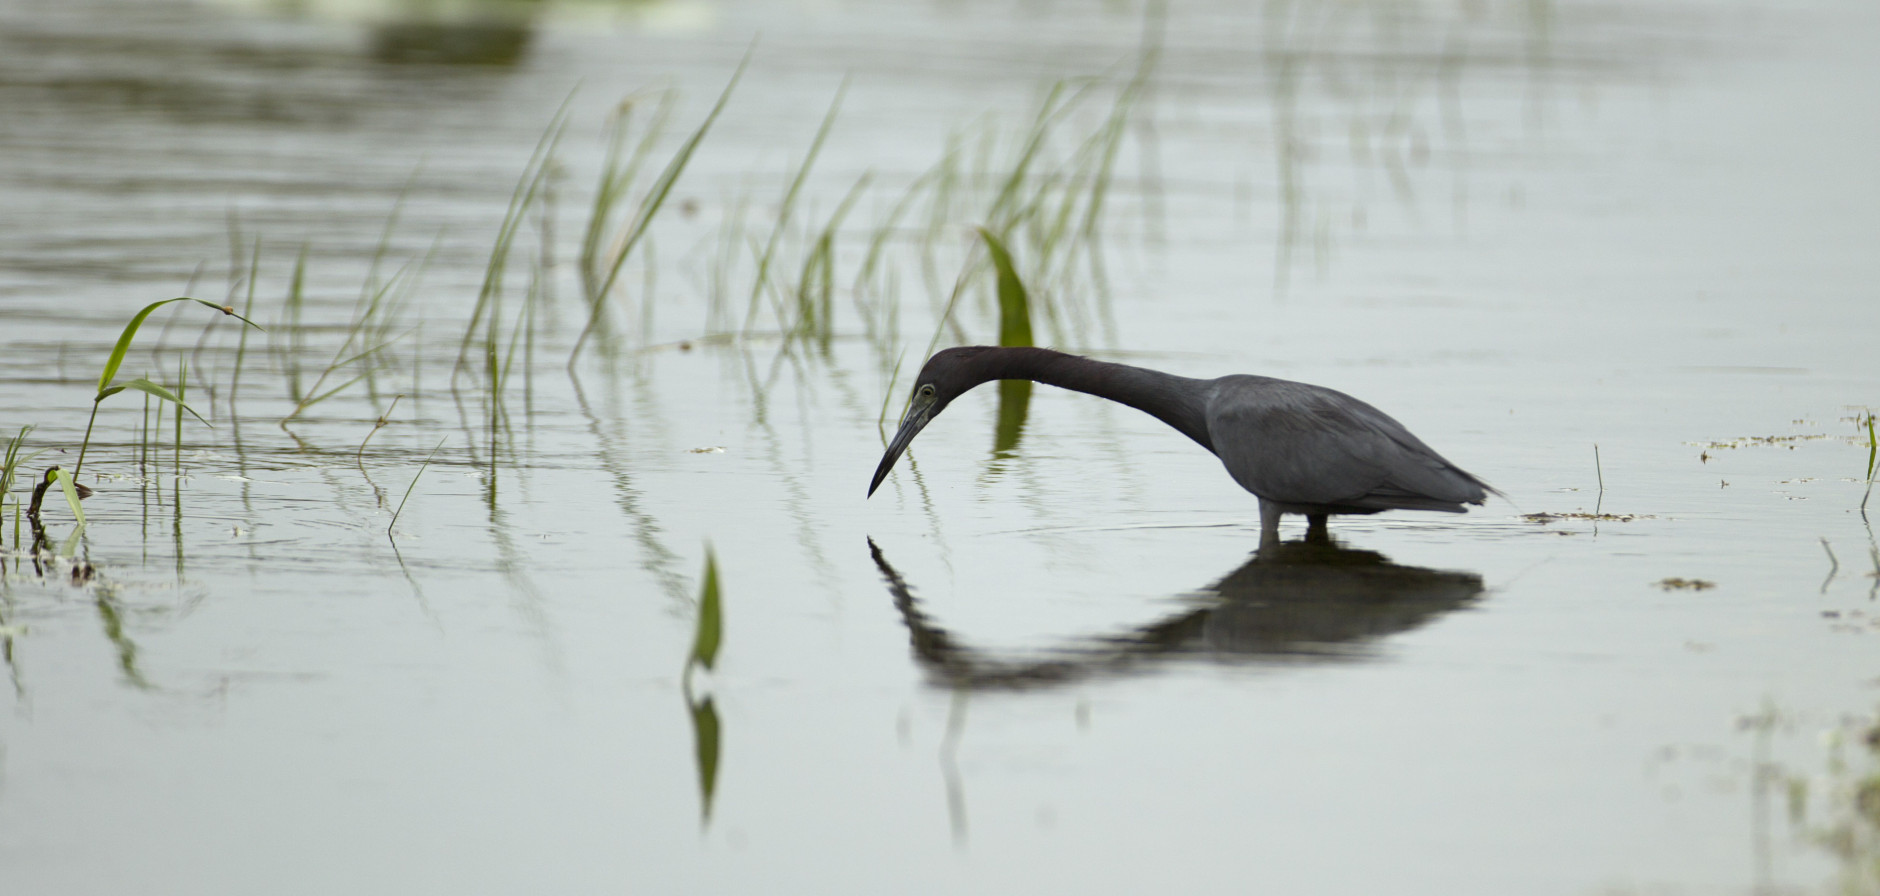 A small blue heron tries to catch a fish in the waters of the Florida Everglades National Park Sunday, Oct. 30, 2011. (AP Photo/J Pat Carter)